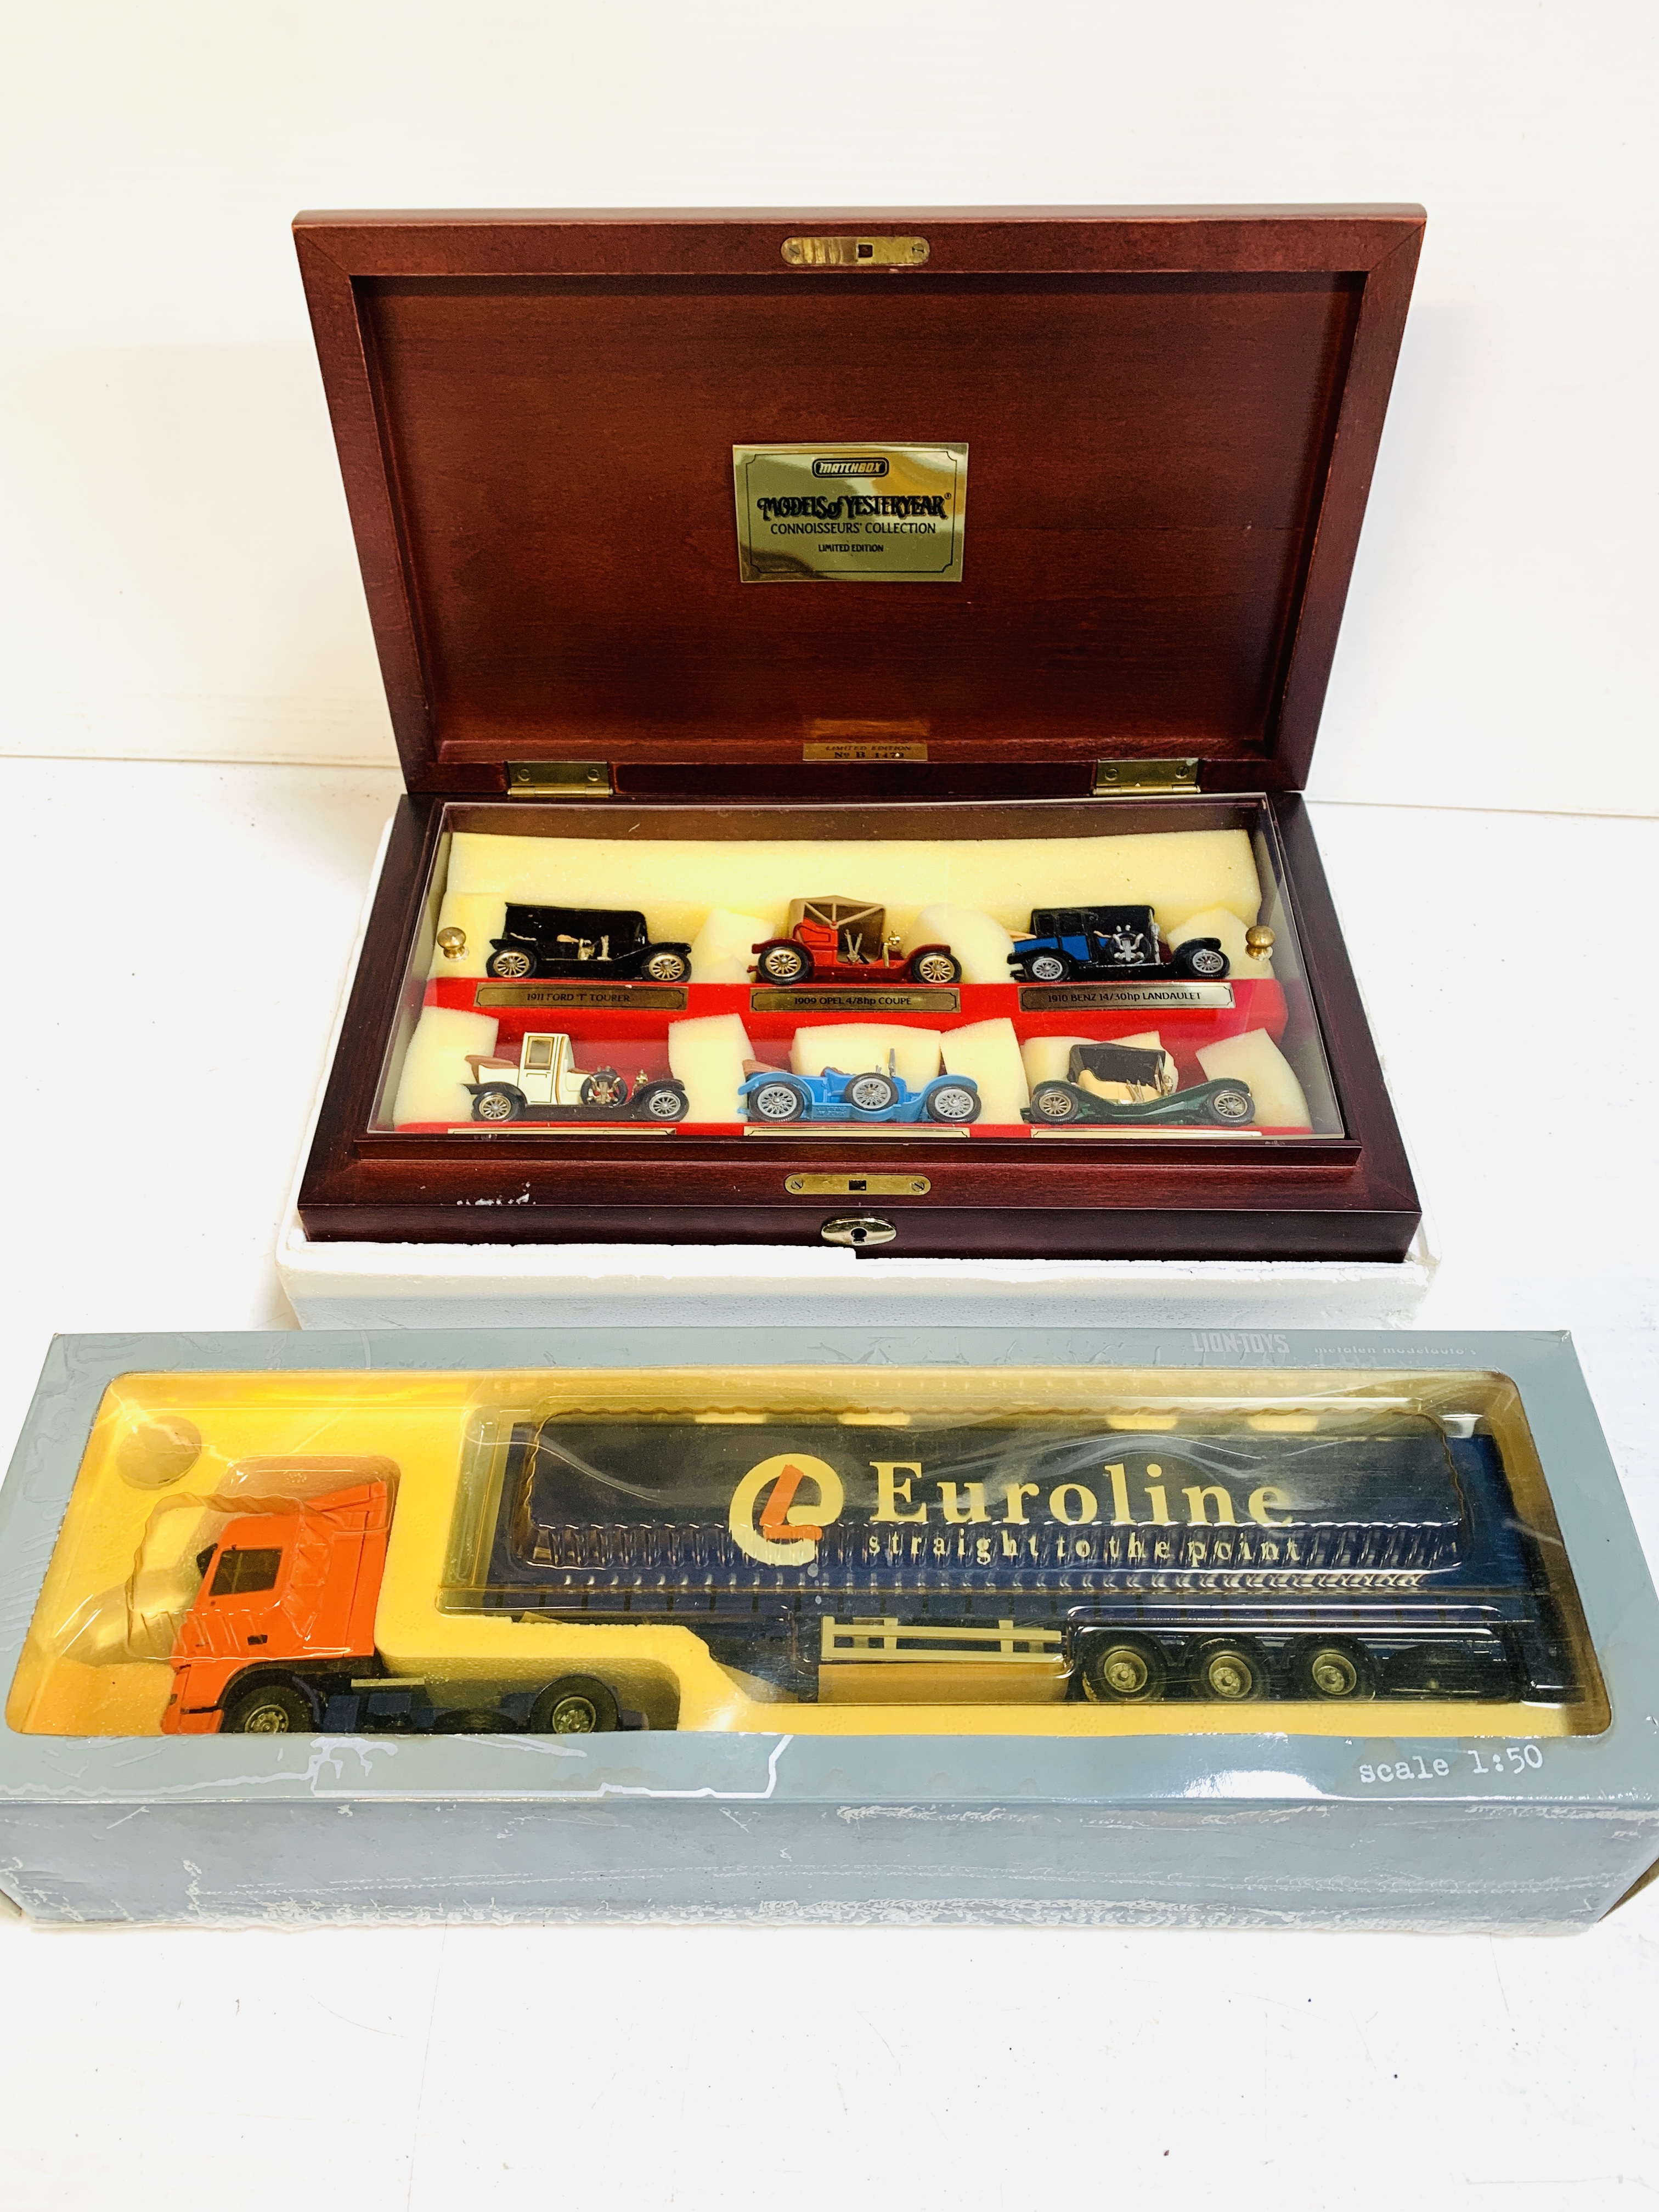 Matchbox Models of Yesteryear Connoisseurs' Collection